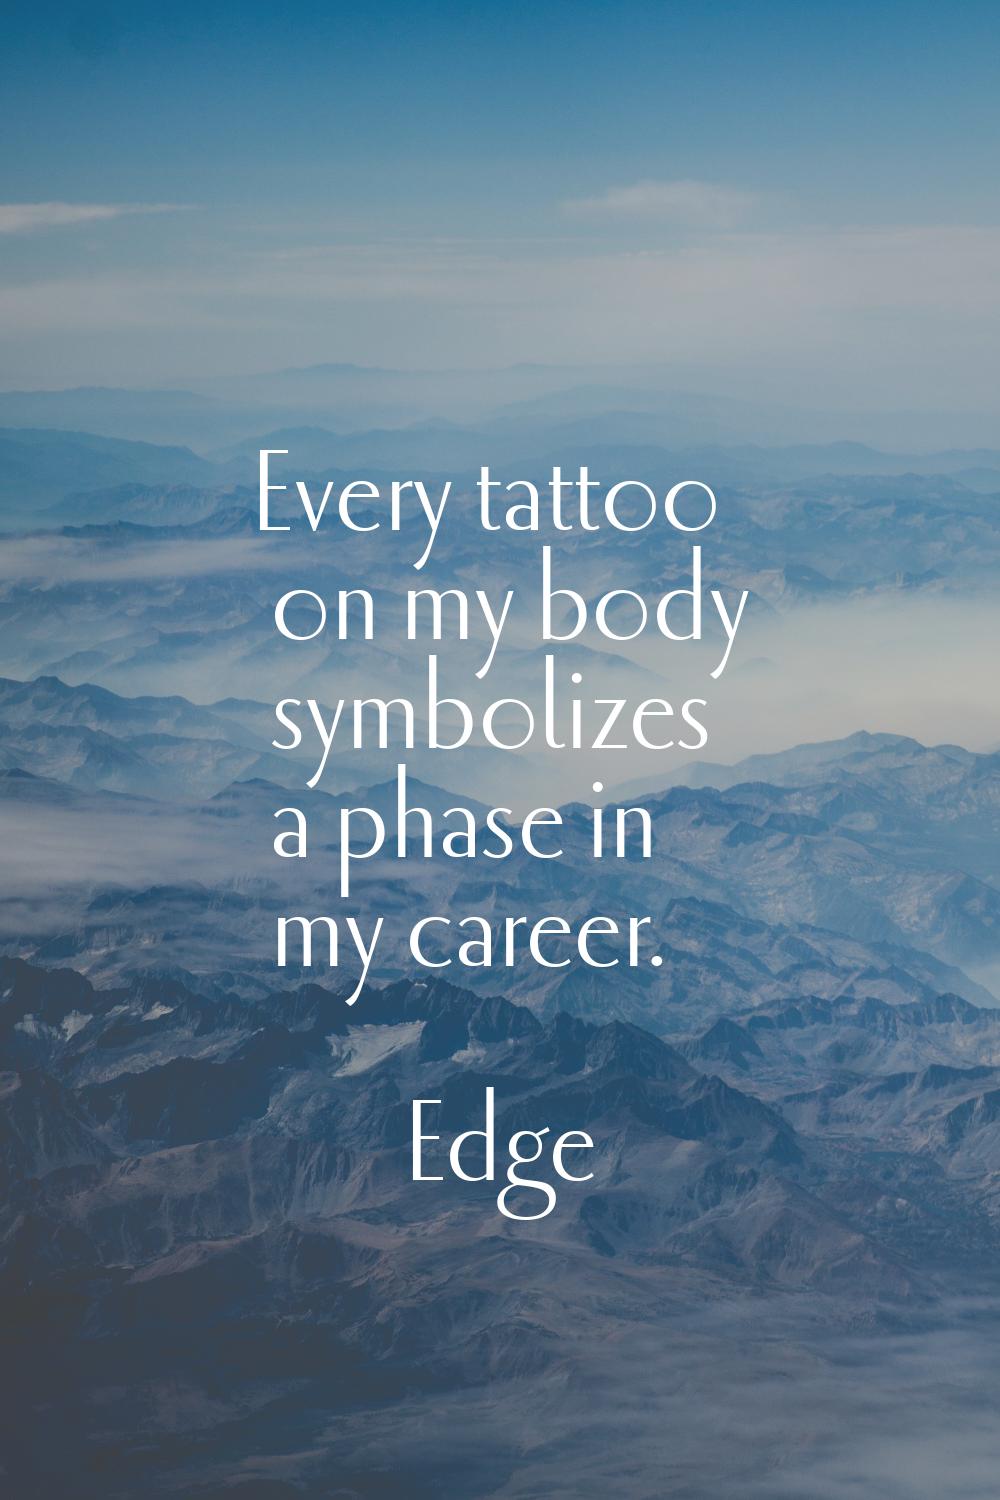 Every tattoo on my body symbolizes a phase in my career.